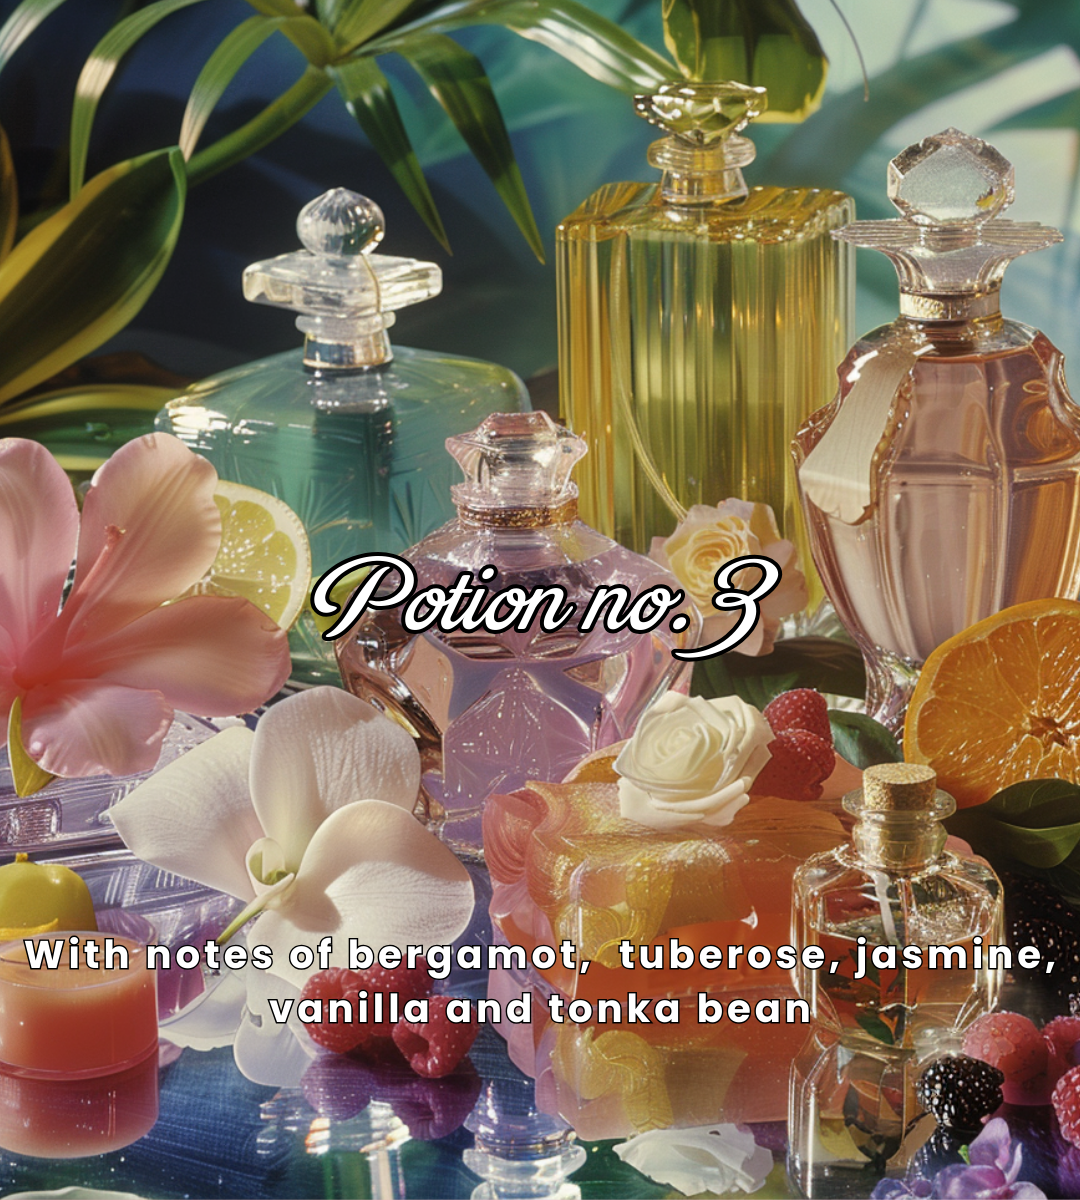 Potion No. 3 Roll On Perfume